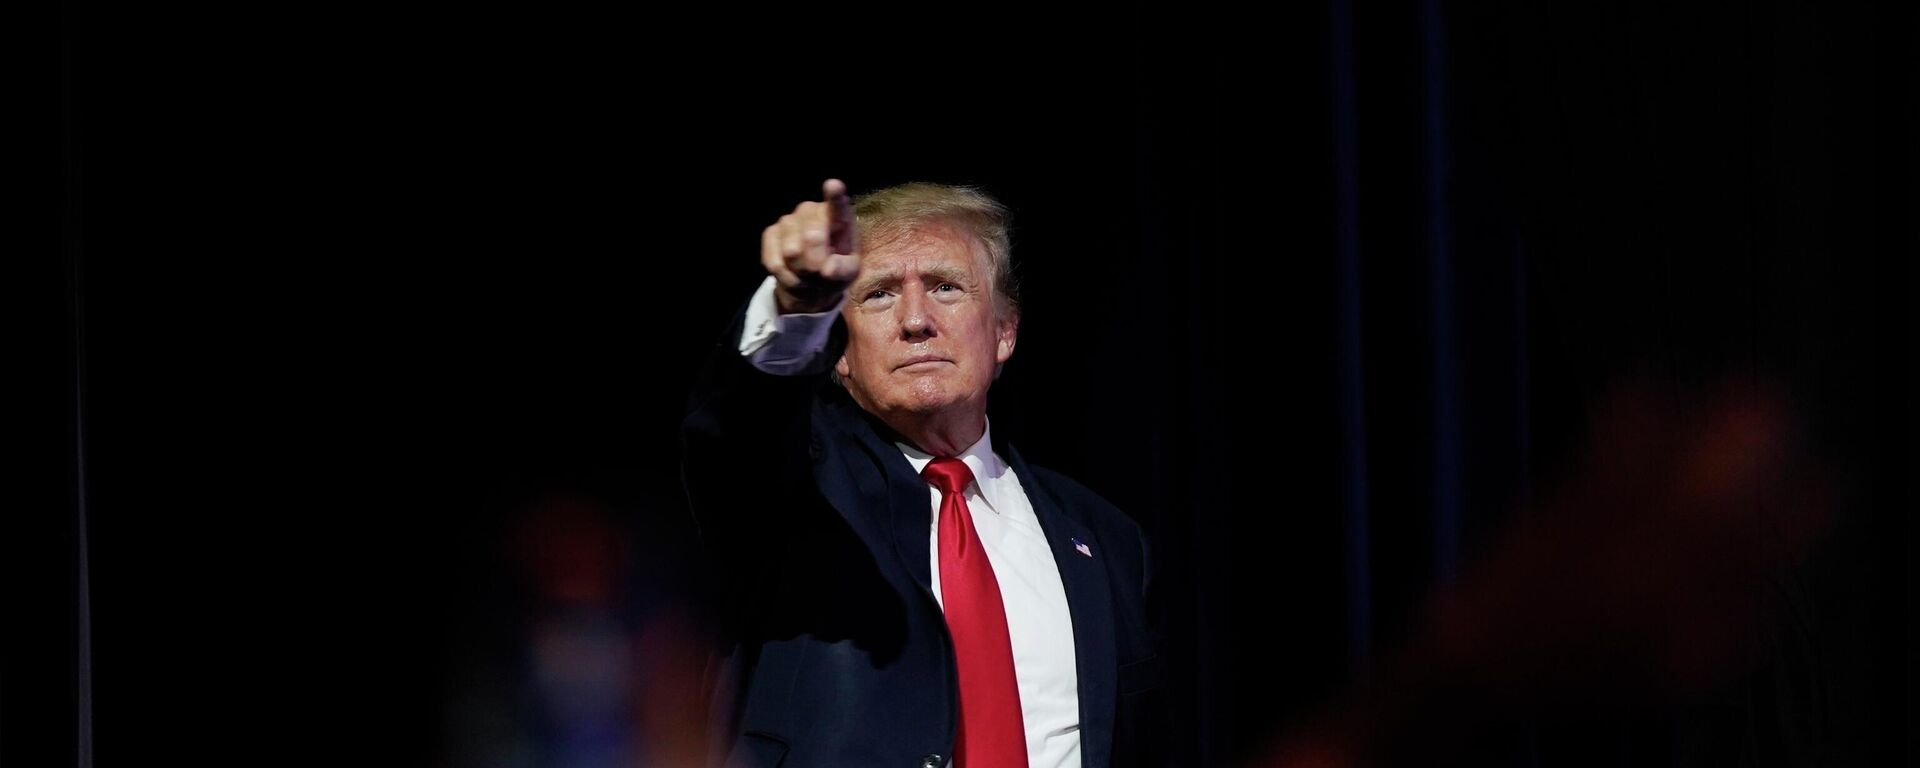 FILE - In this July 24, 2021, file photo, former President Donald Trump points to supporters after speaking at a Turning Point Action gathering, in Phoenix - Sputnik International, 1920, 20.01.2022